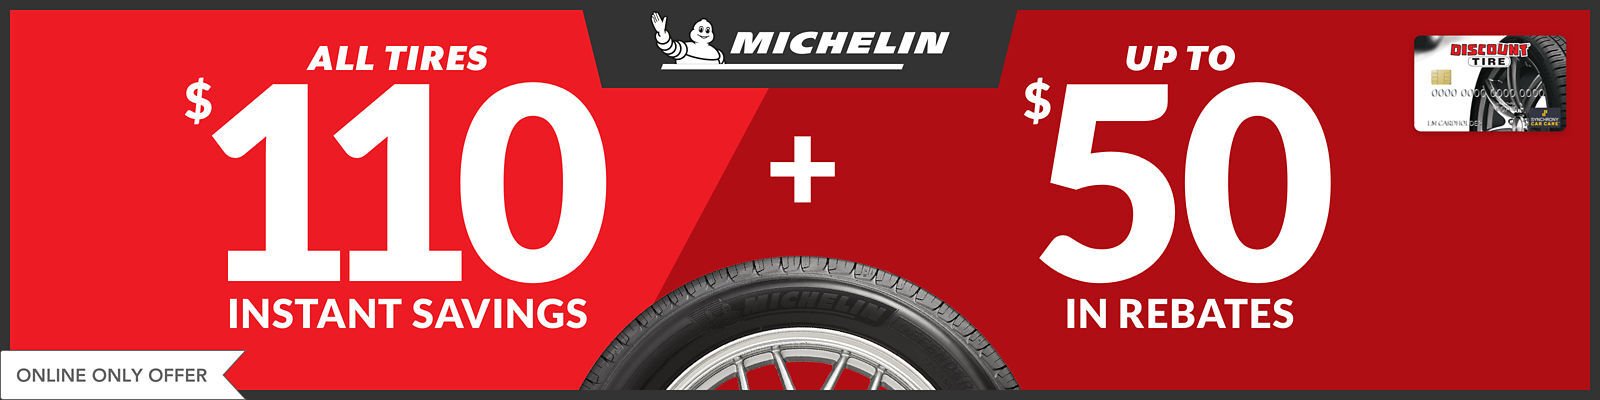 Michelin tire discount for May 2021 with Discount Tire Direct